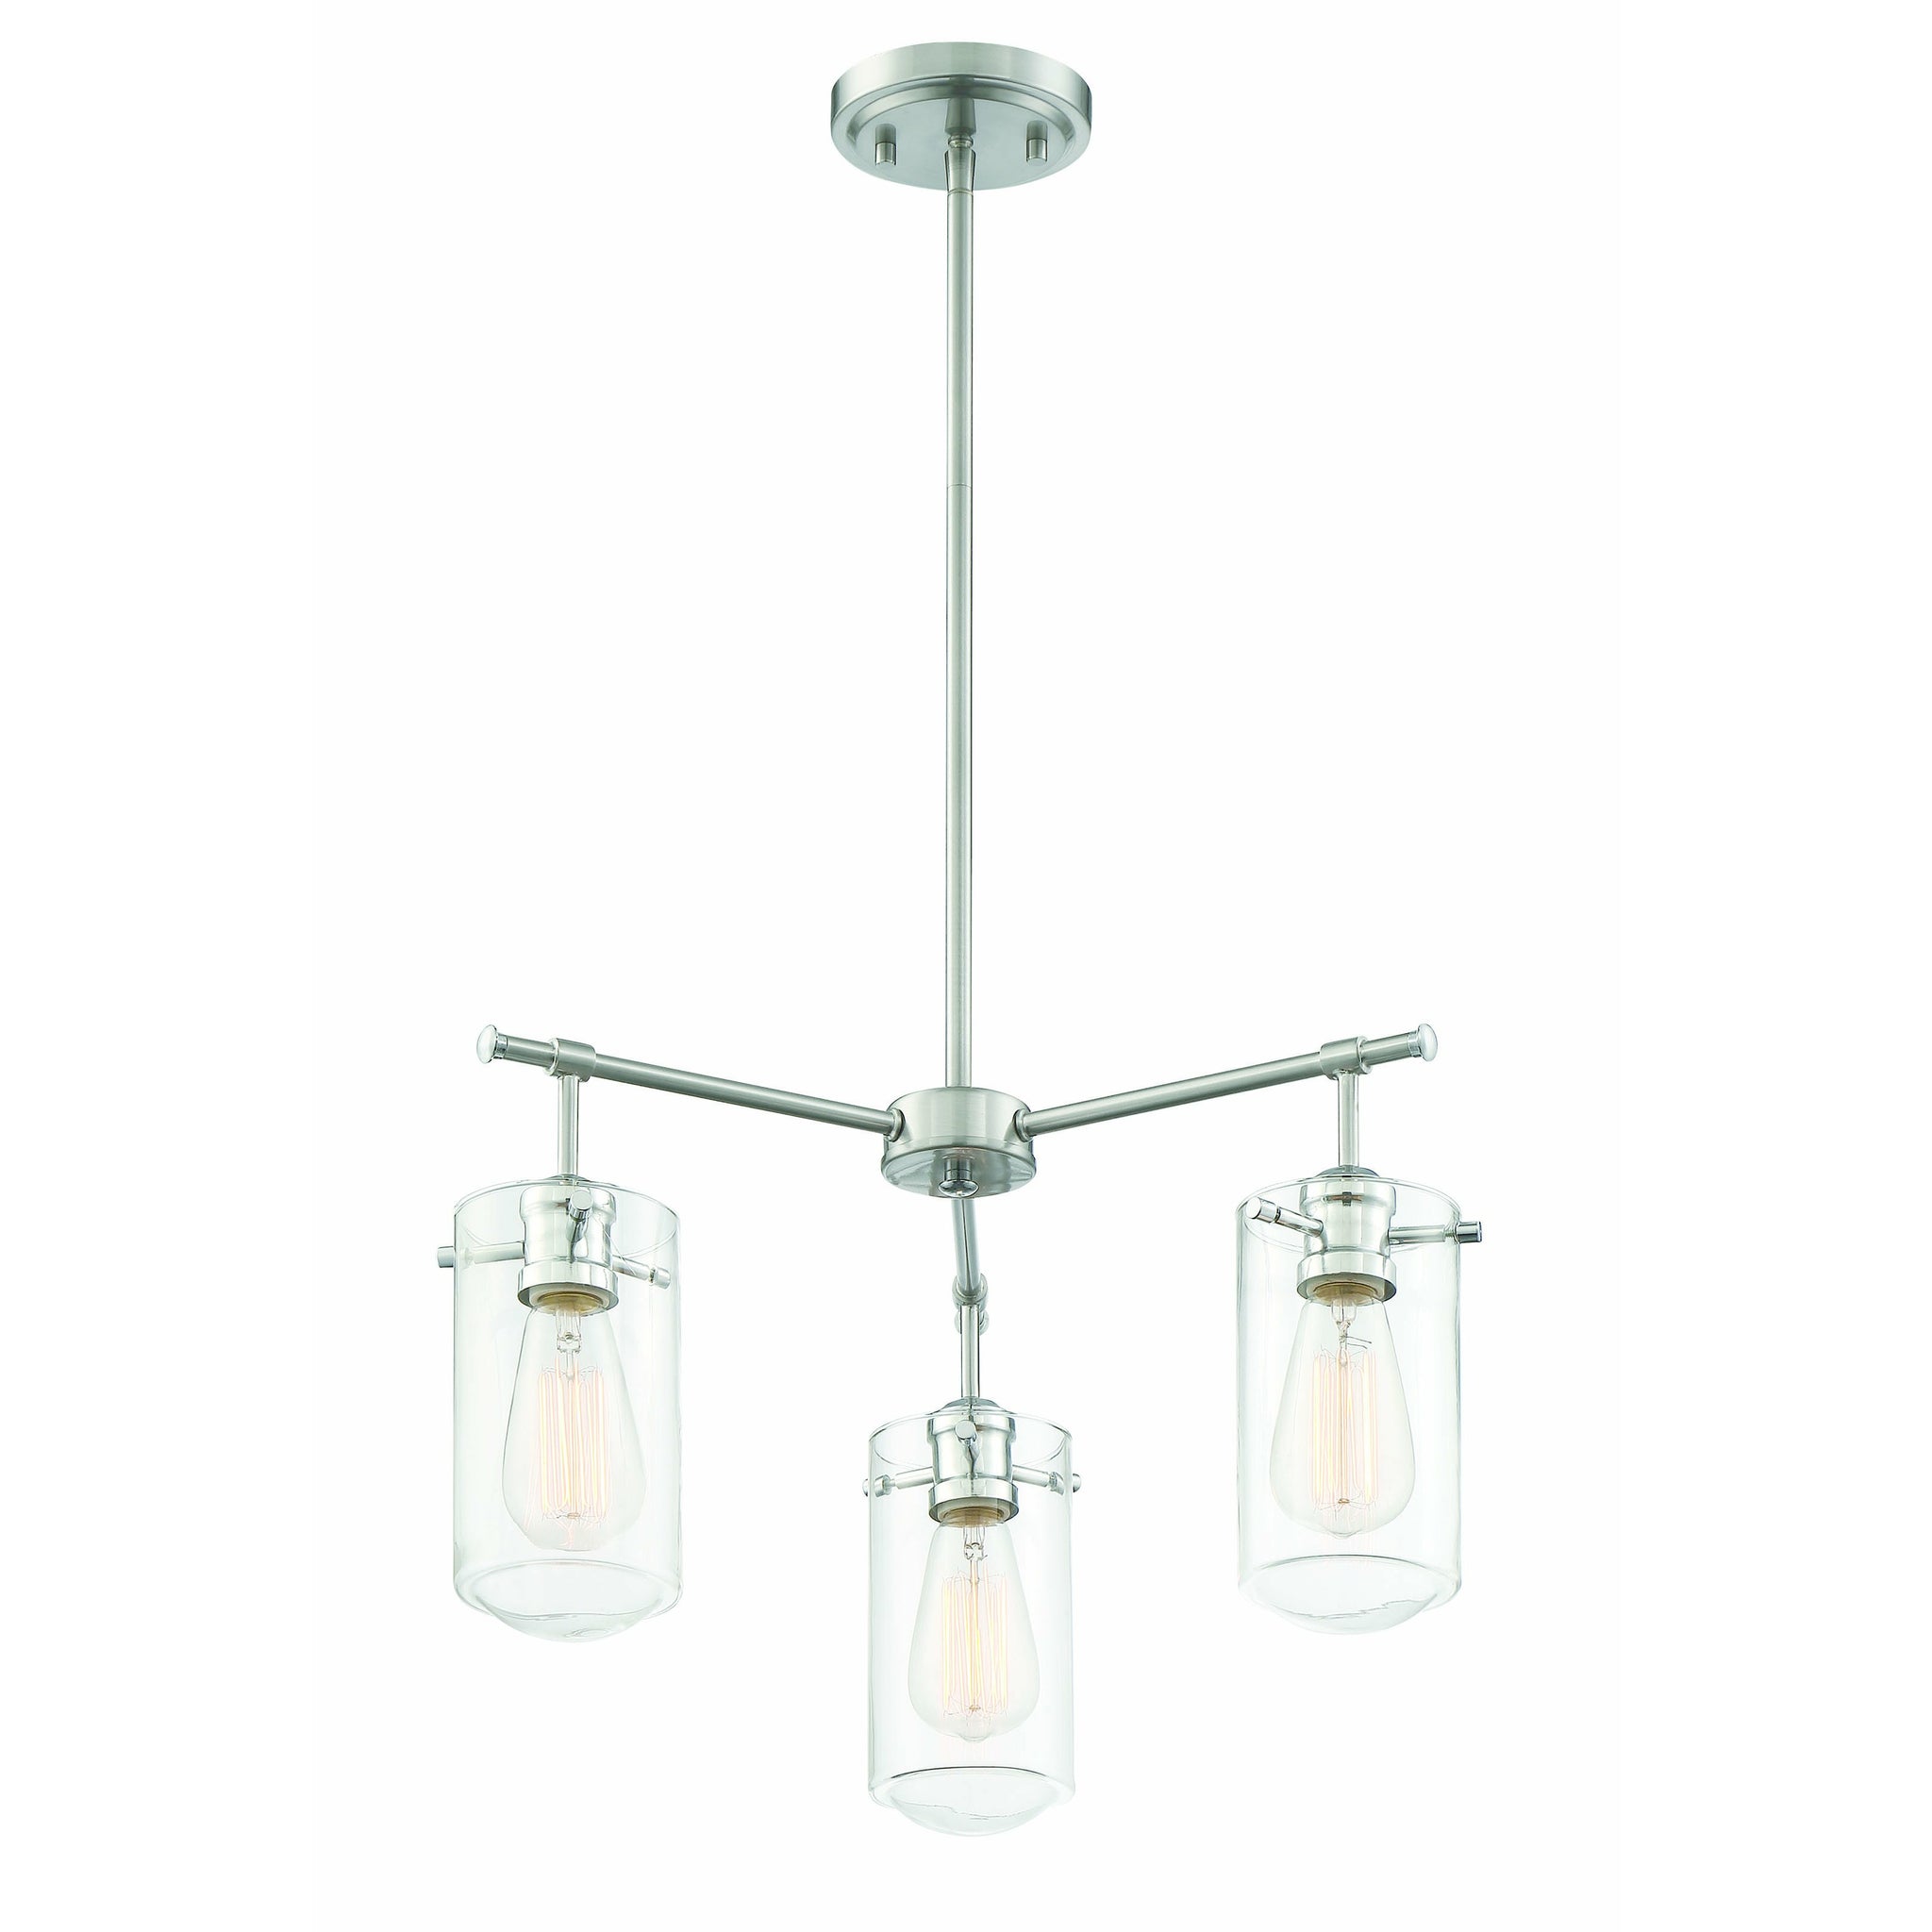 Clayton Chandelier Satin nickel with Chrome Accents